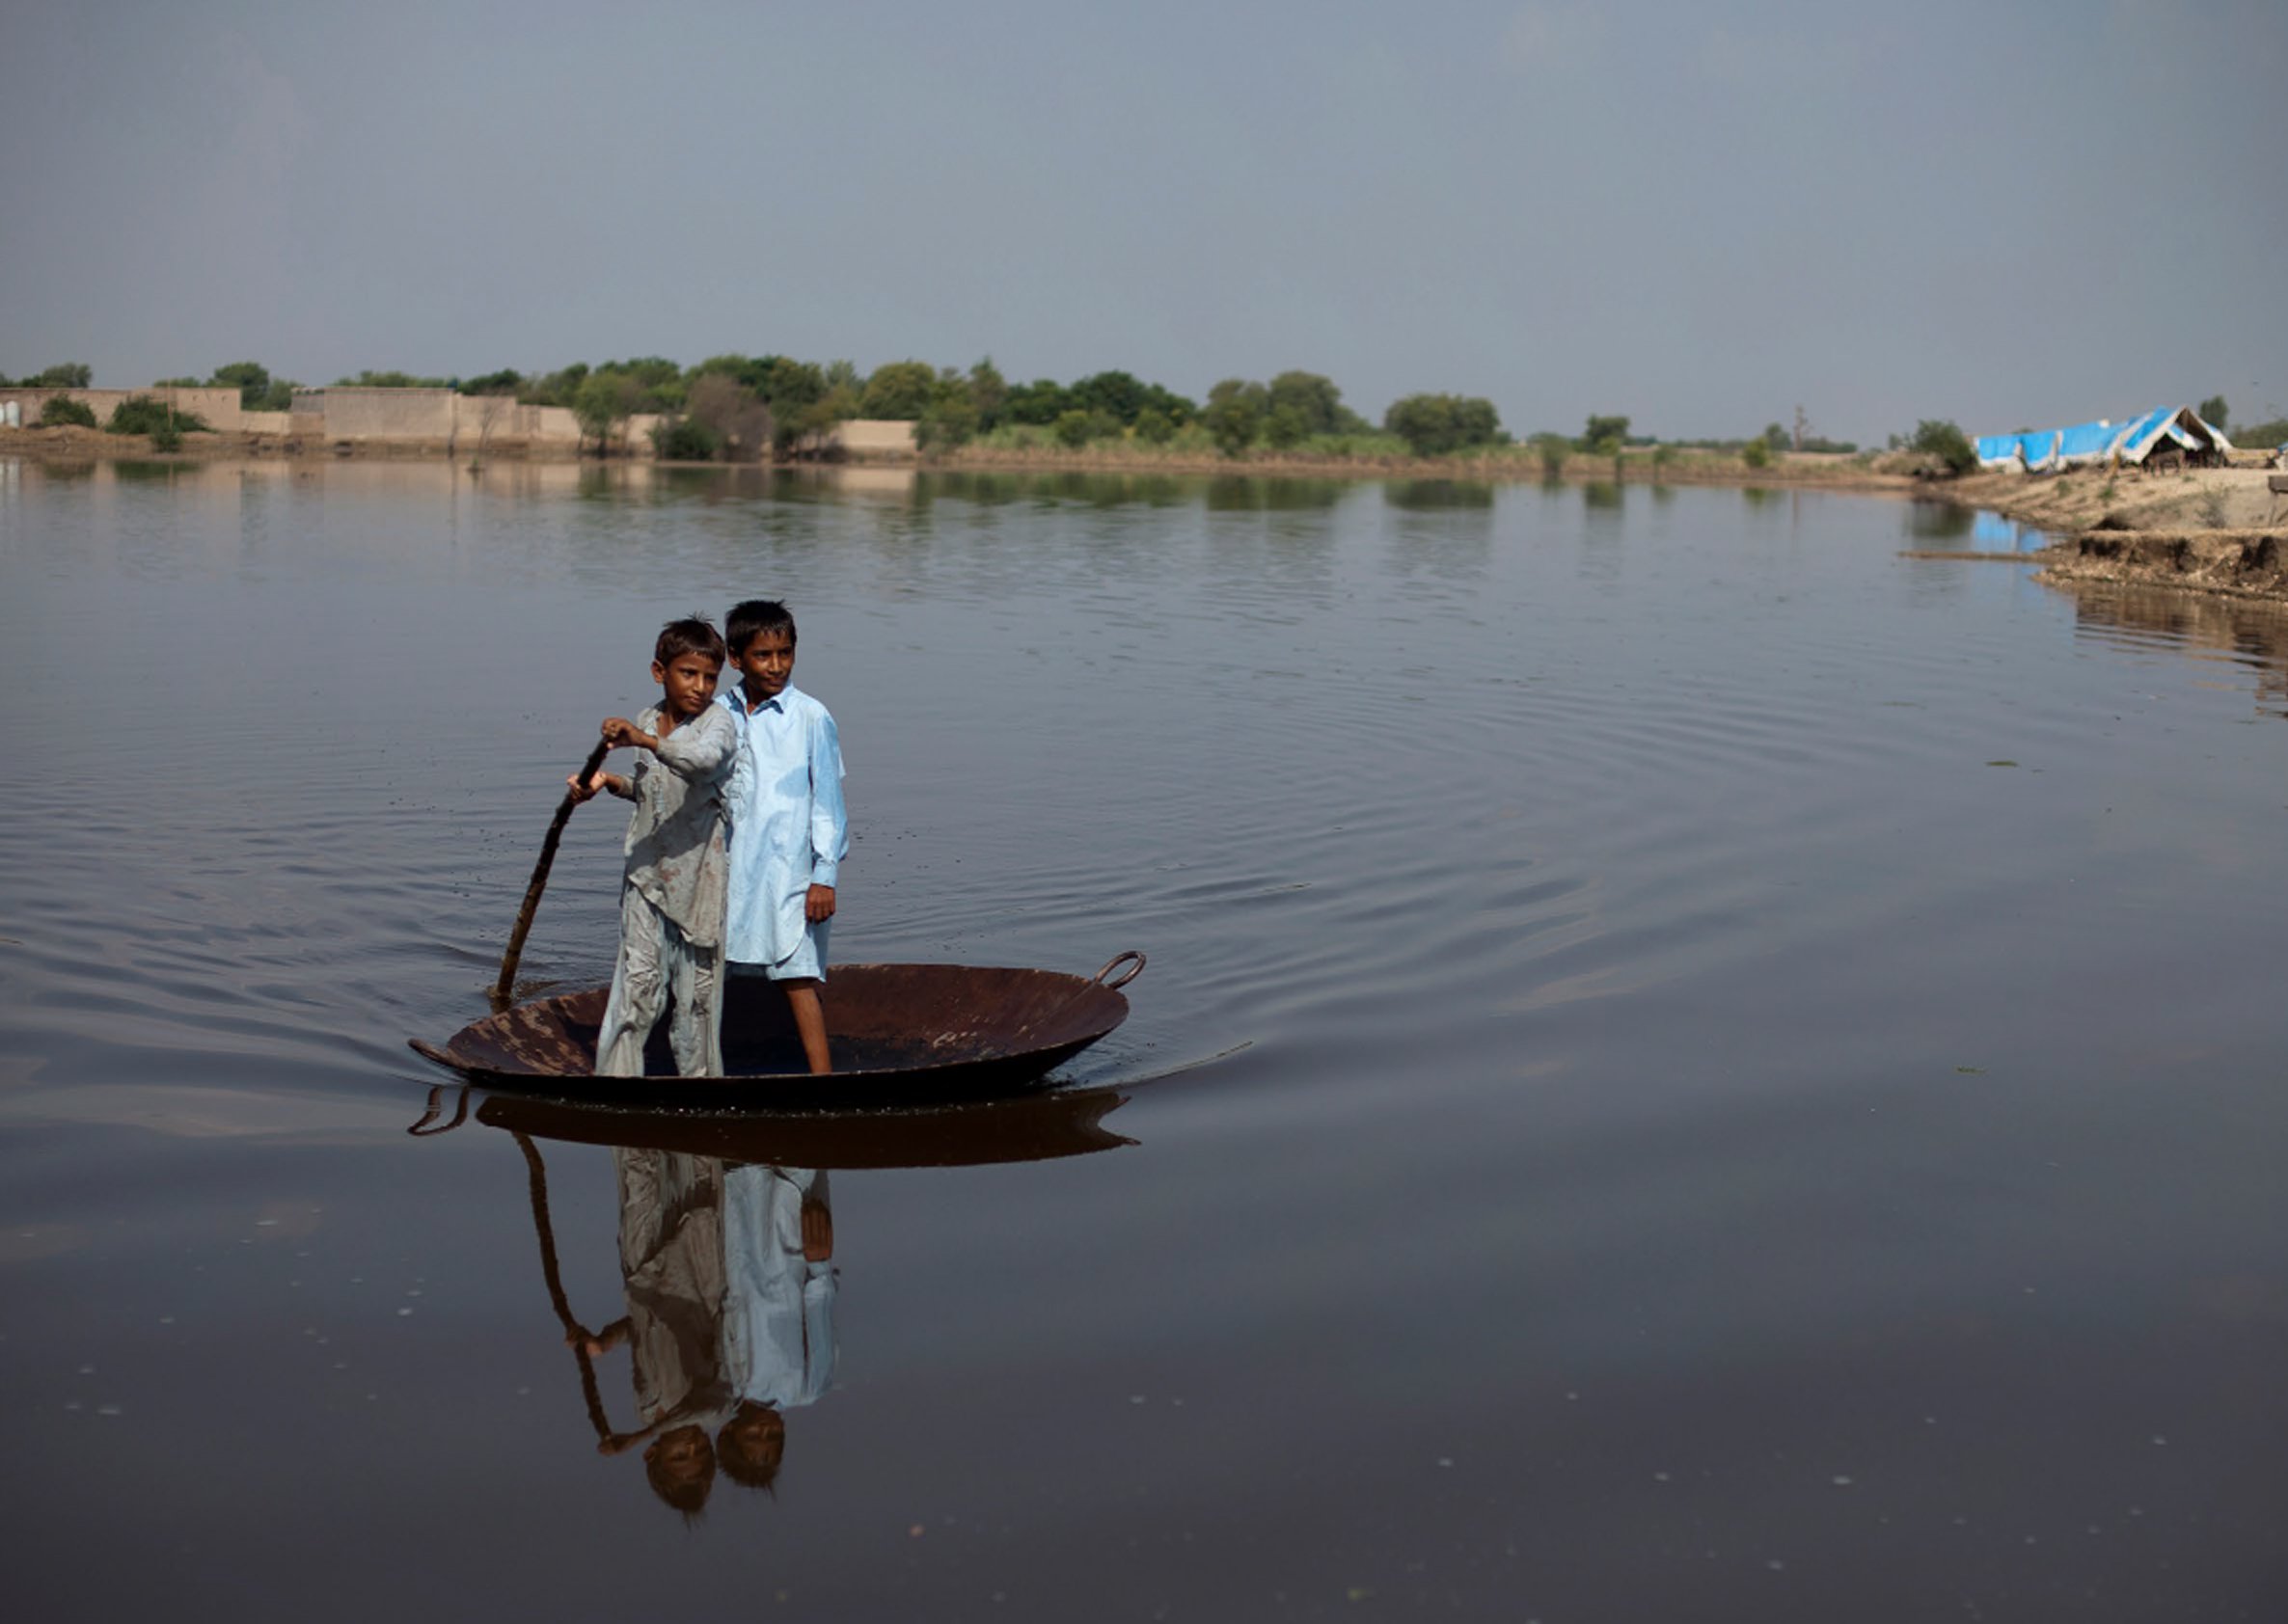 Boys use a large steel pot as a raft to cross an expanse of flood water in Pakistan in 2011